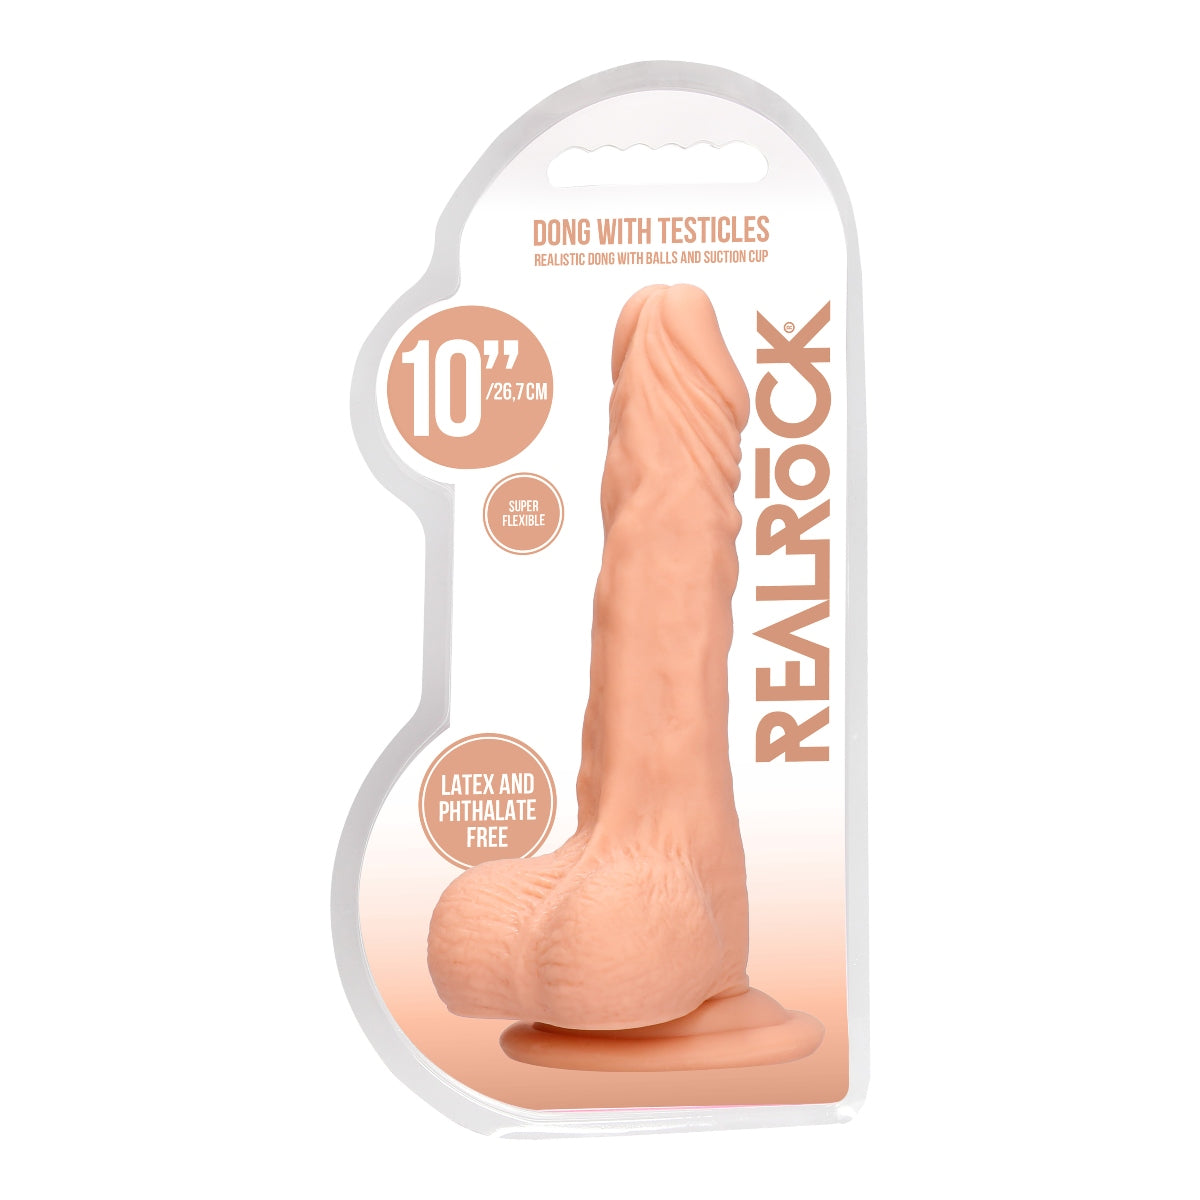 RealRock Realistic Dong With Balls & Suction Cup Pink 10 Inch